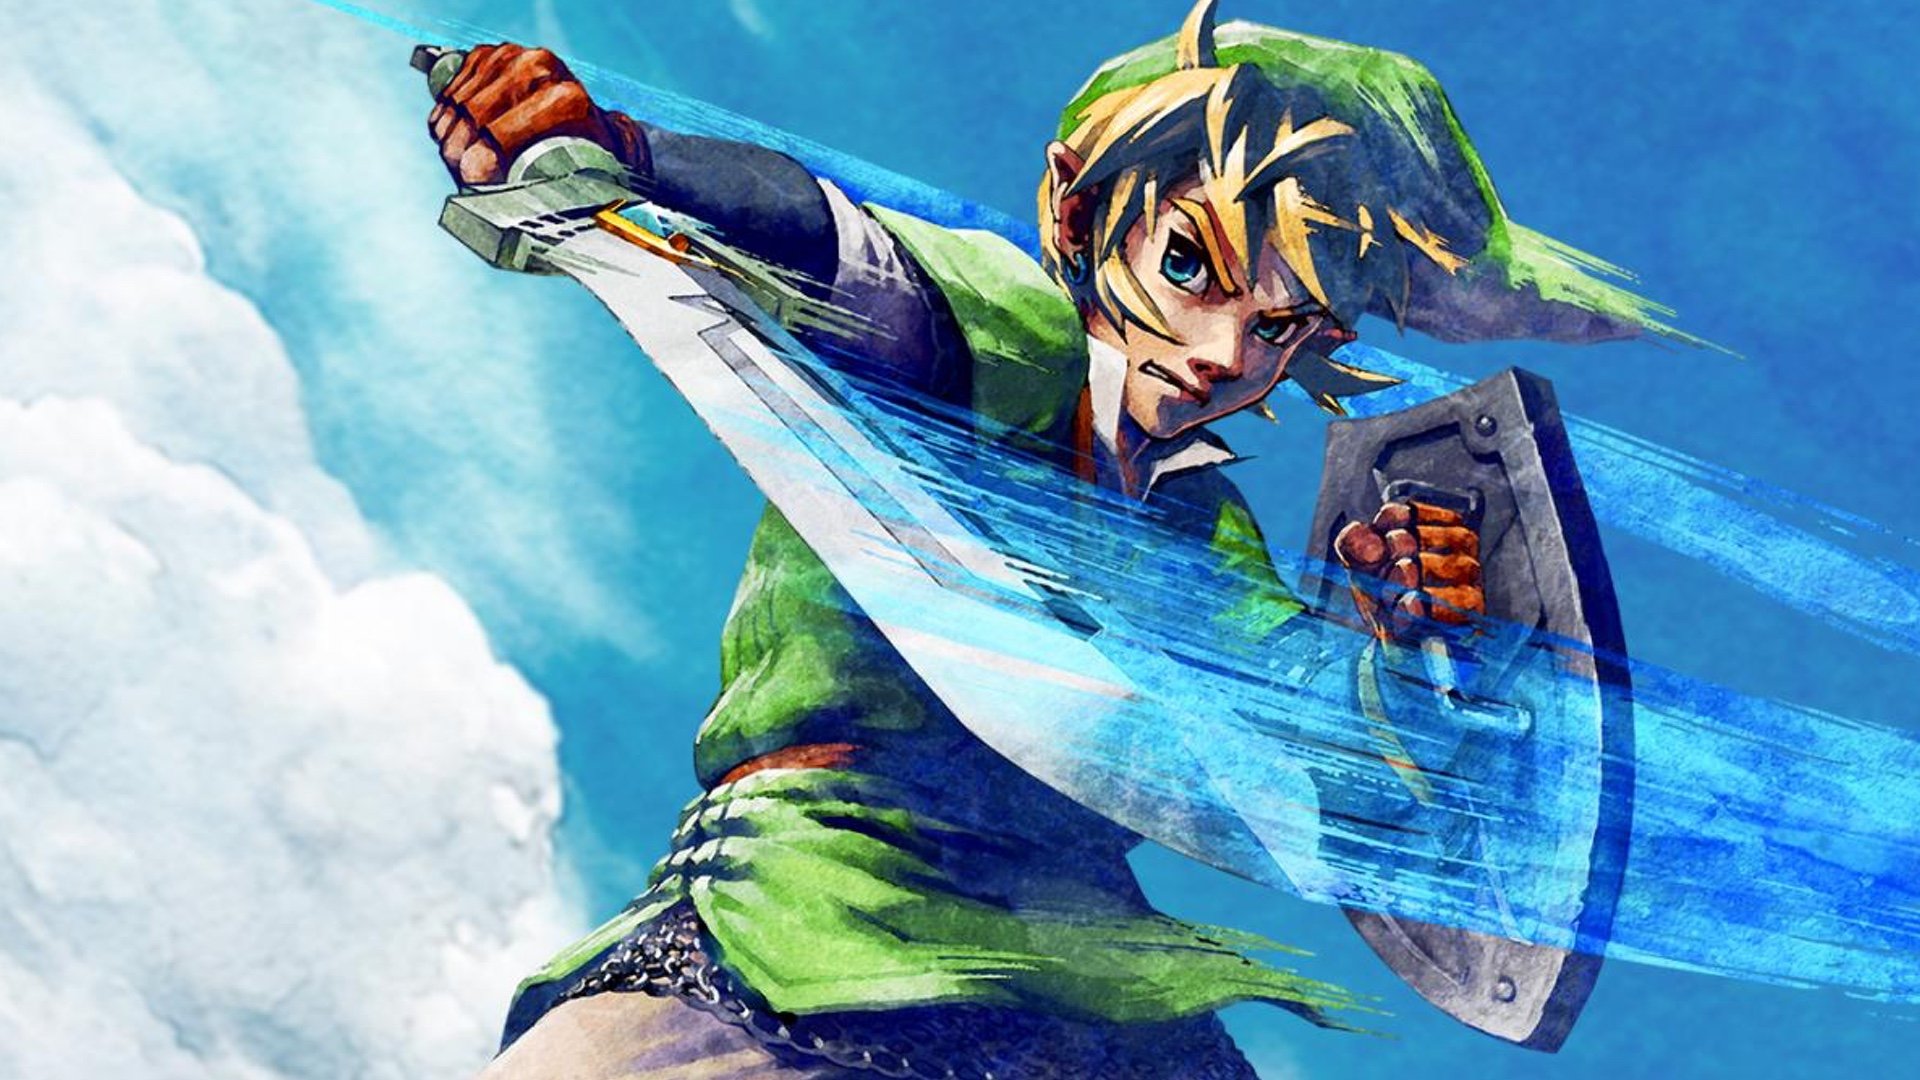 The Legend of Zelda movie is in the works at SONY: Shigeru